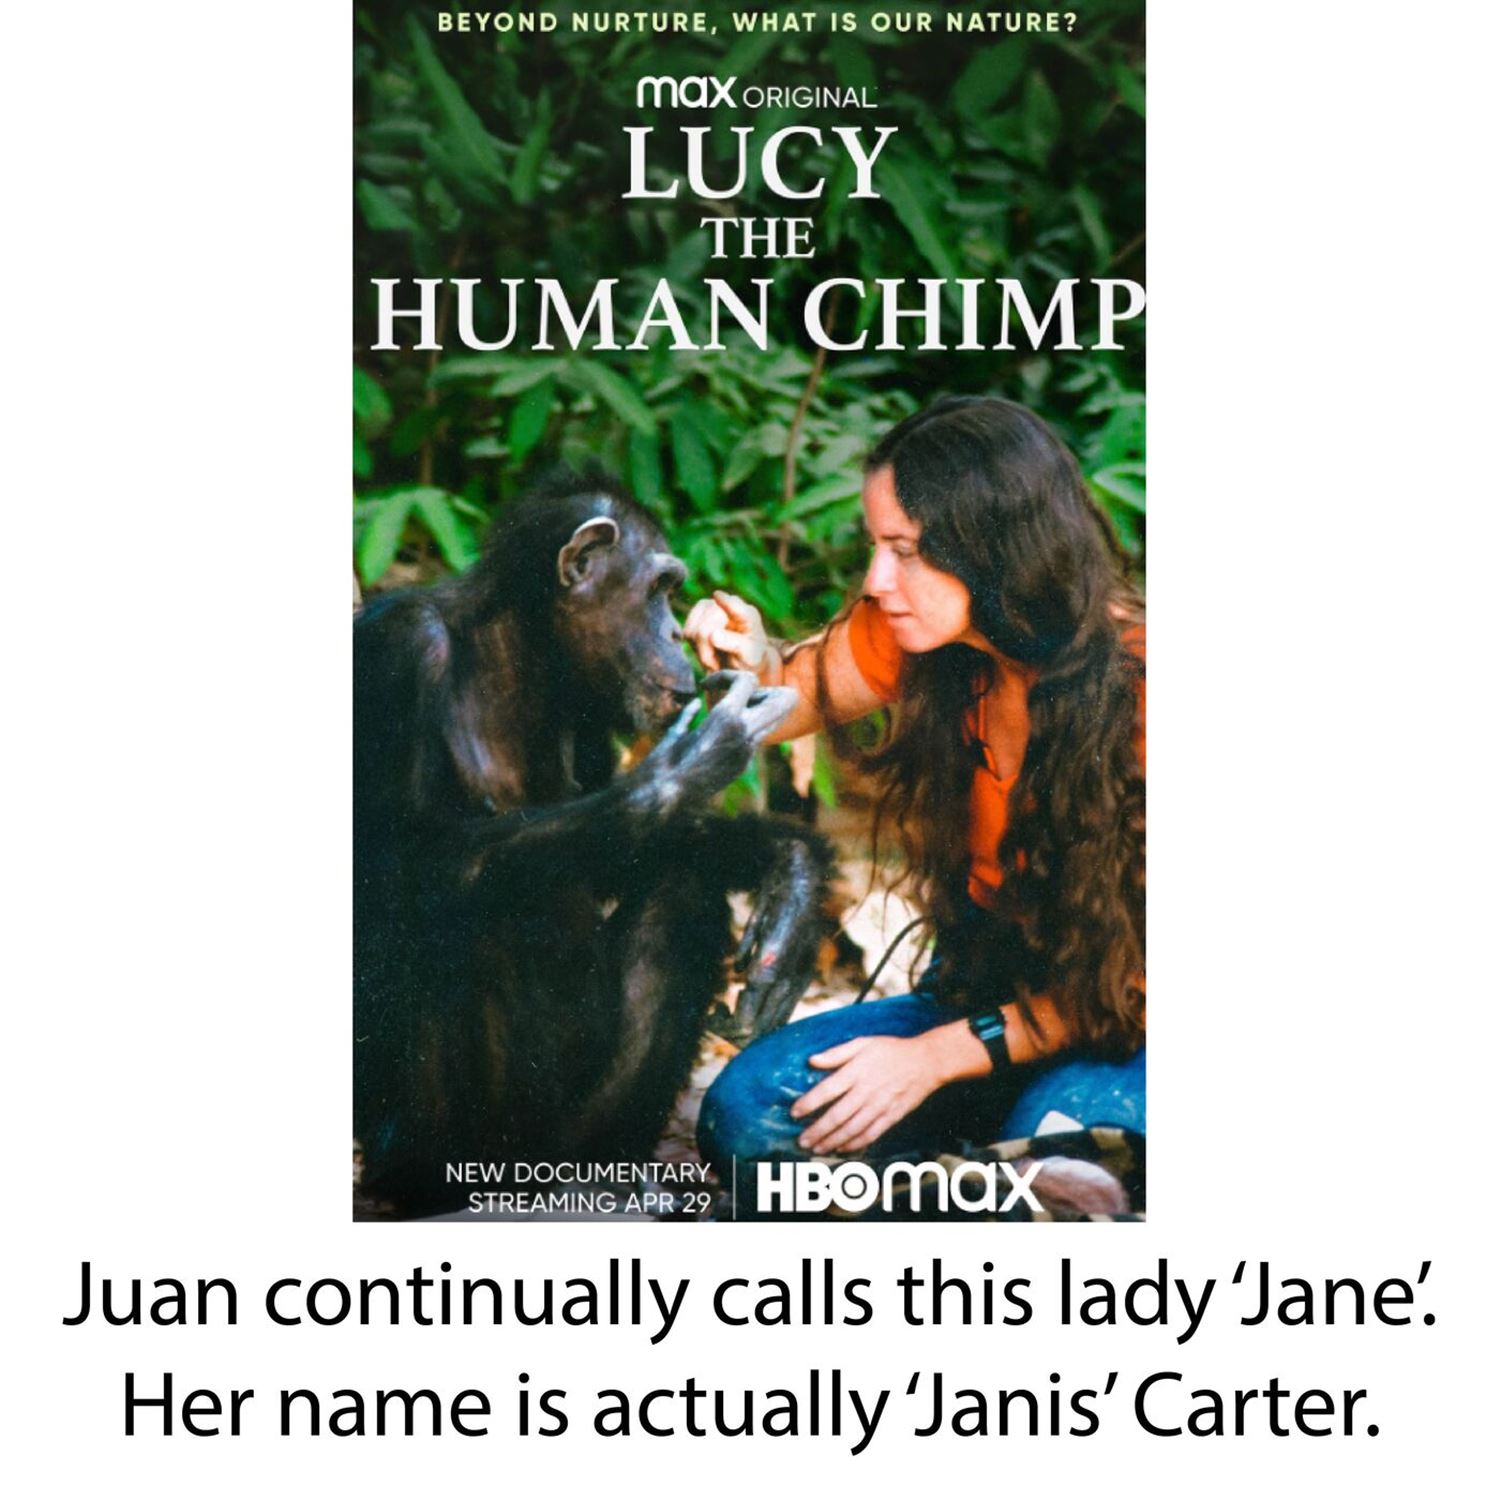 Lucy The Human Chimp documentary